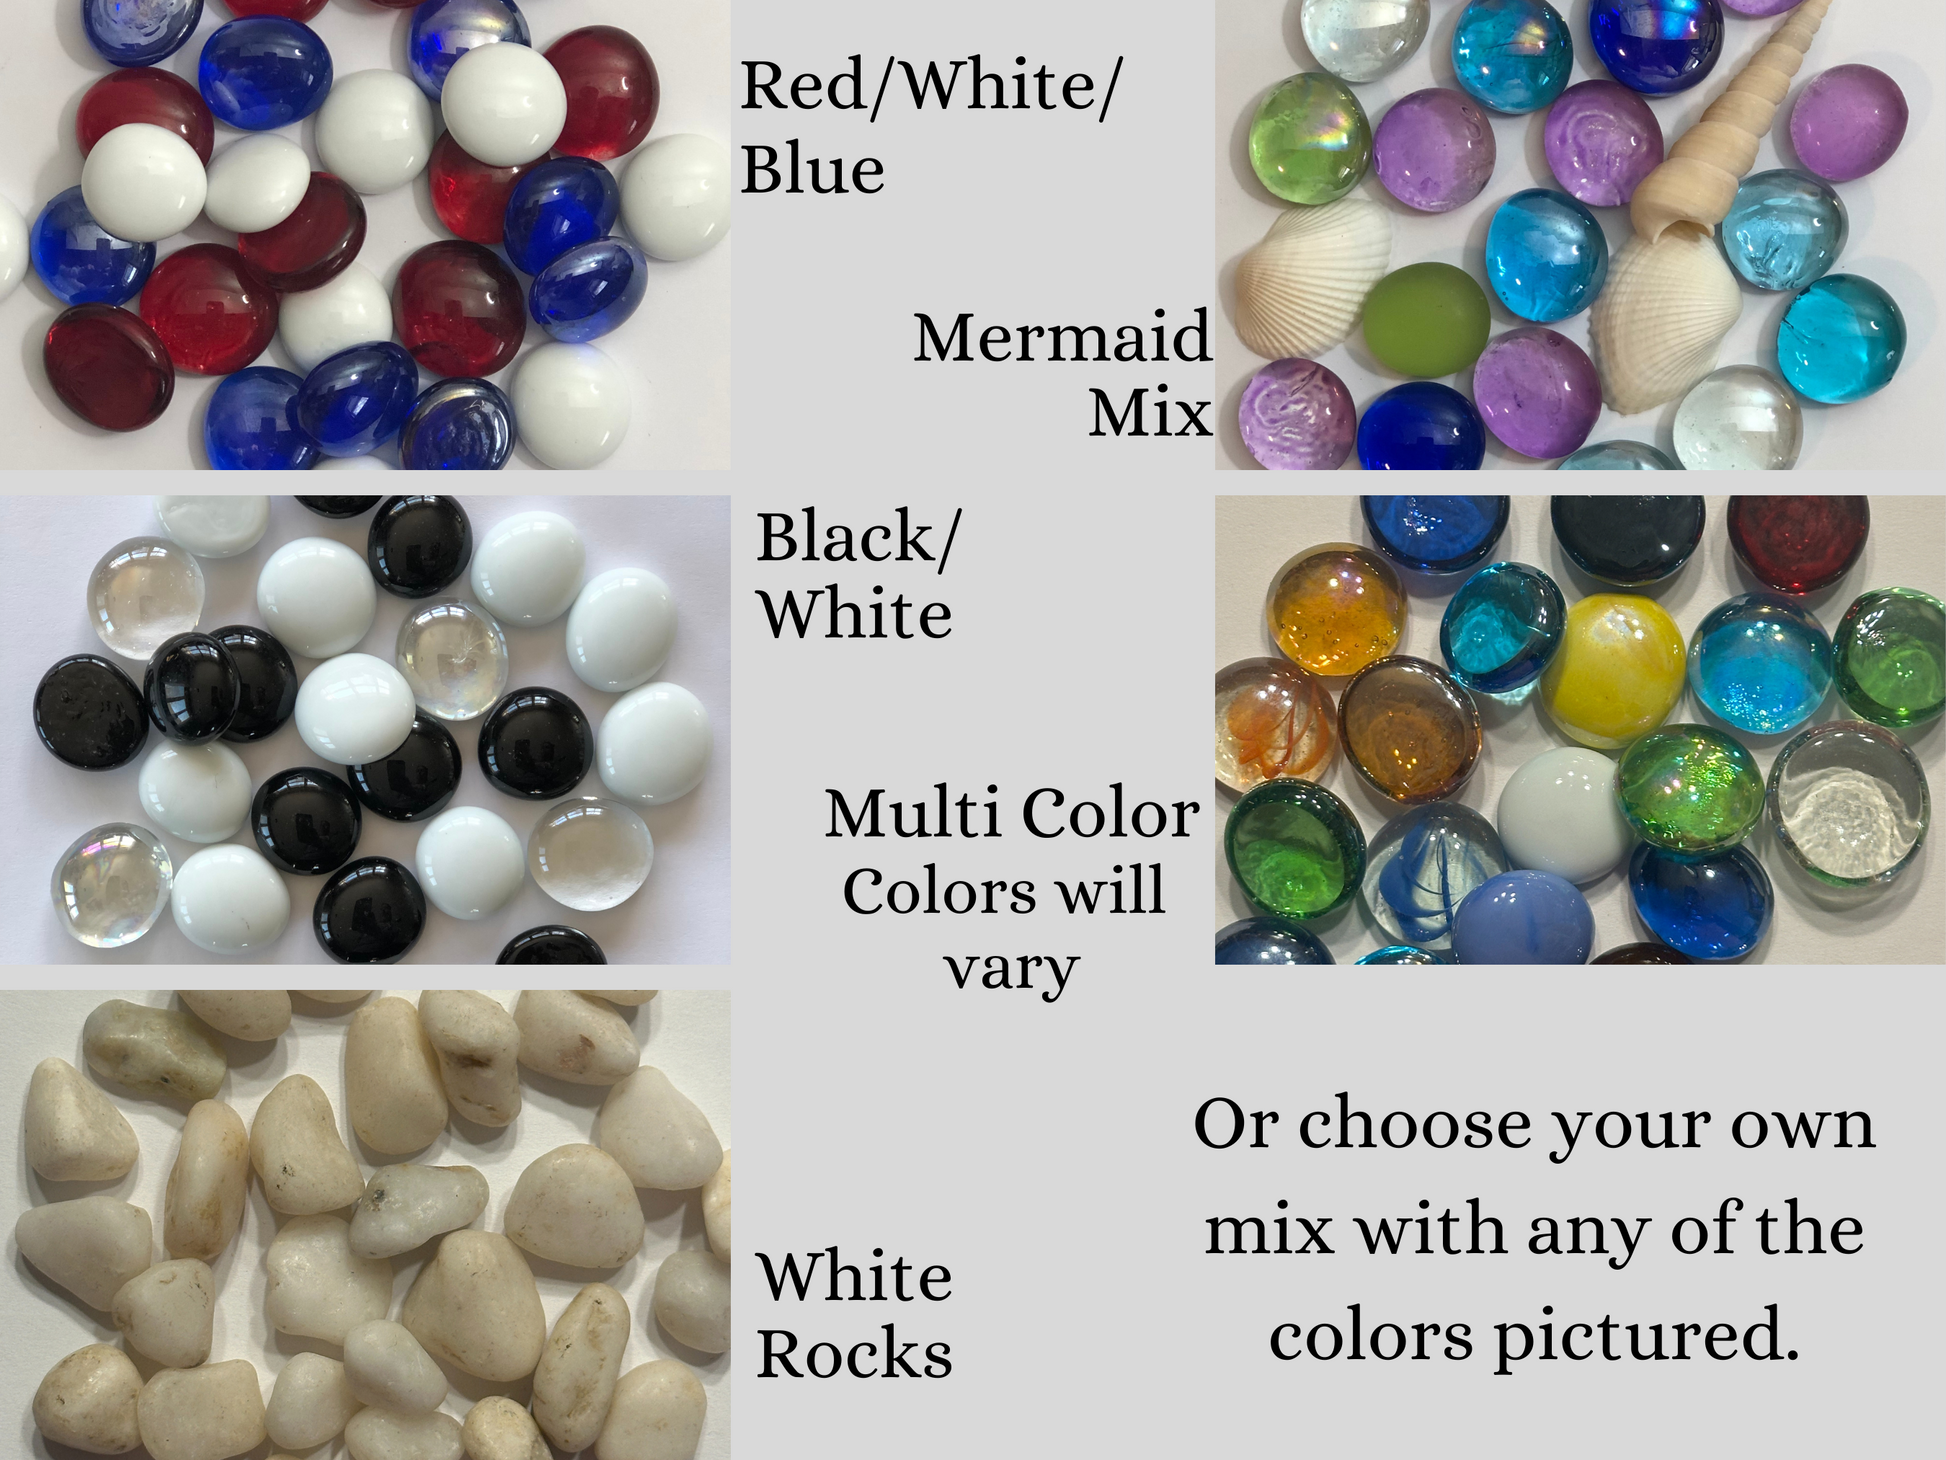 Mosaic Glass Gems.  You choose your own mix with any of the colors pictured. A few of the top options include red white and blue, mermaid mix, black and white, white rocks and multi-color, which is our top selling option.  Mama B's 